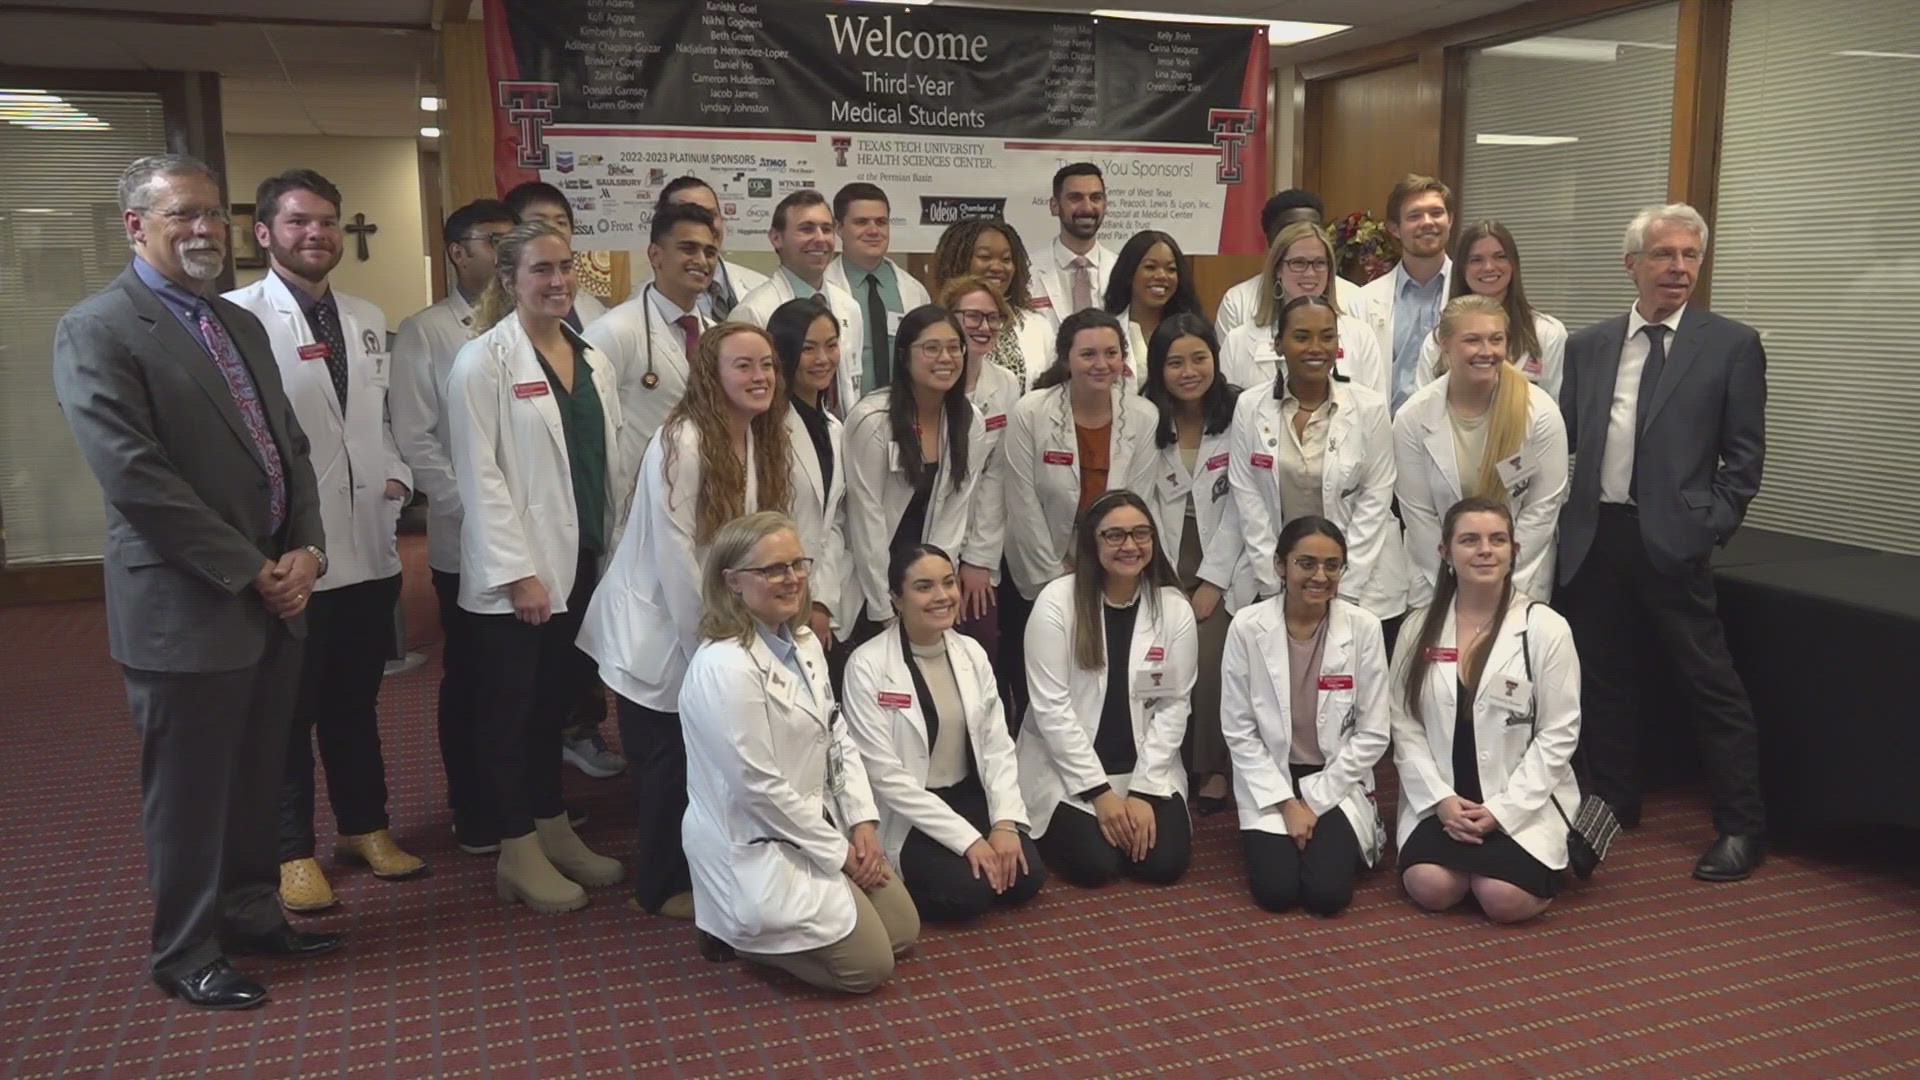 The goal is to help the third-year medical students get comfortable in Odessa in hopes they will stay to work in the Permian Basin when their education is complete.